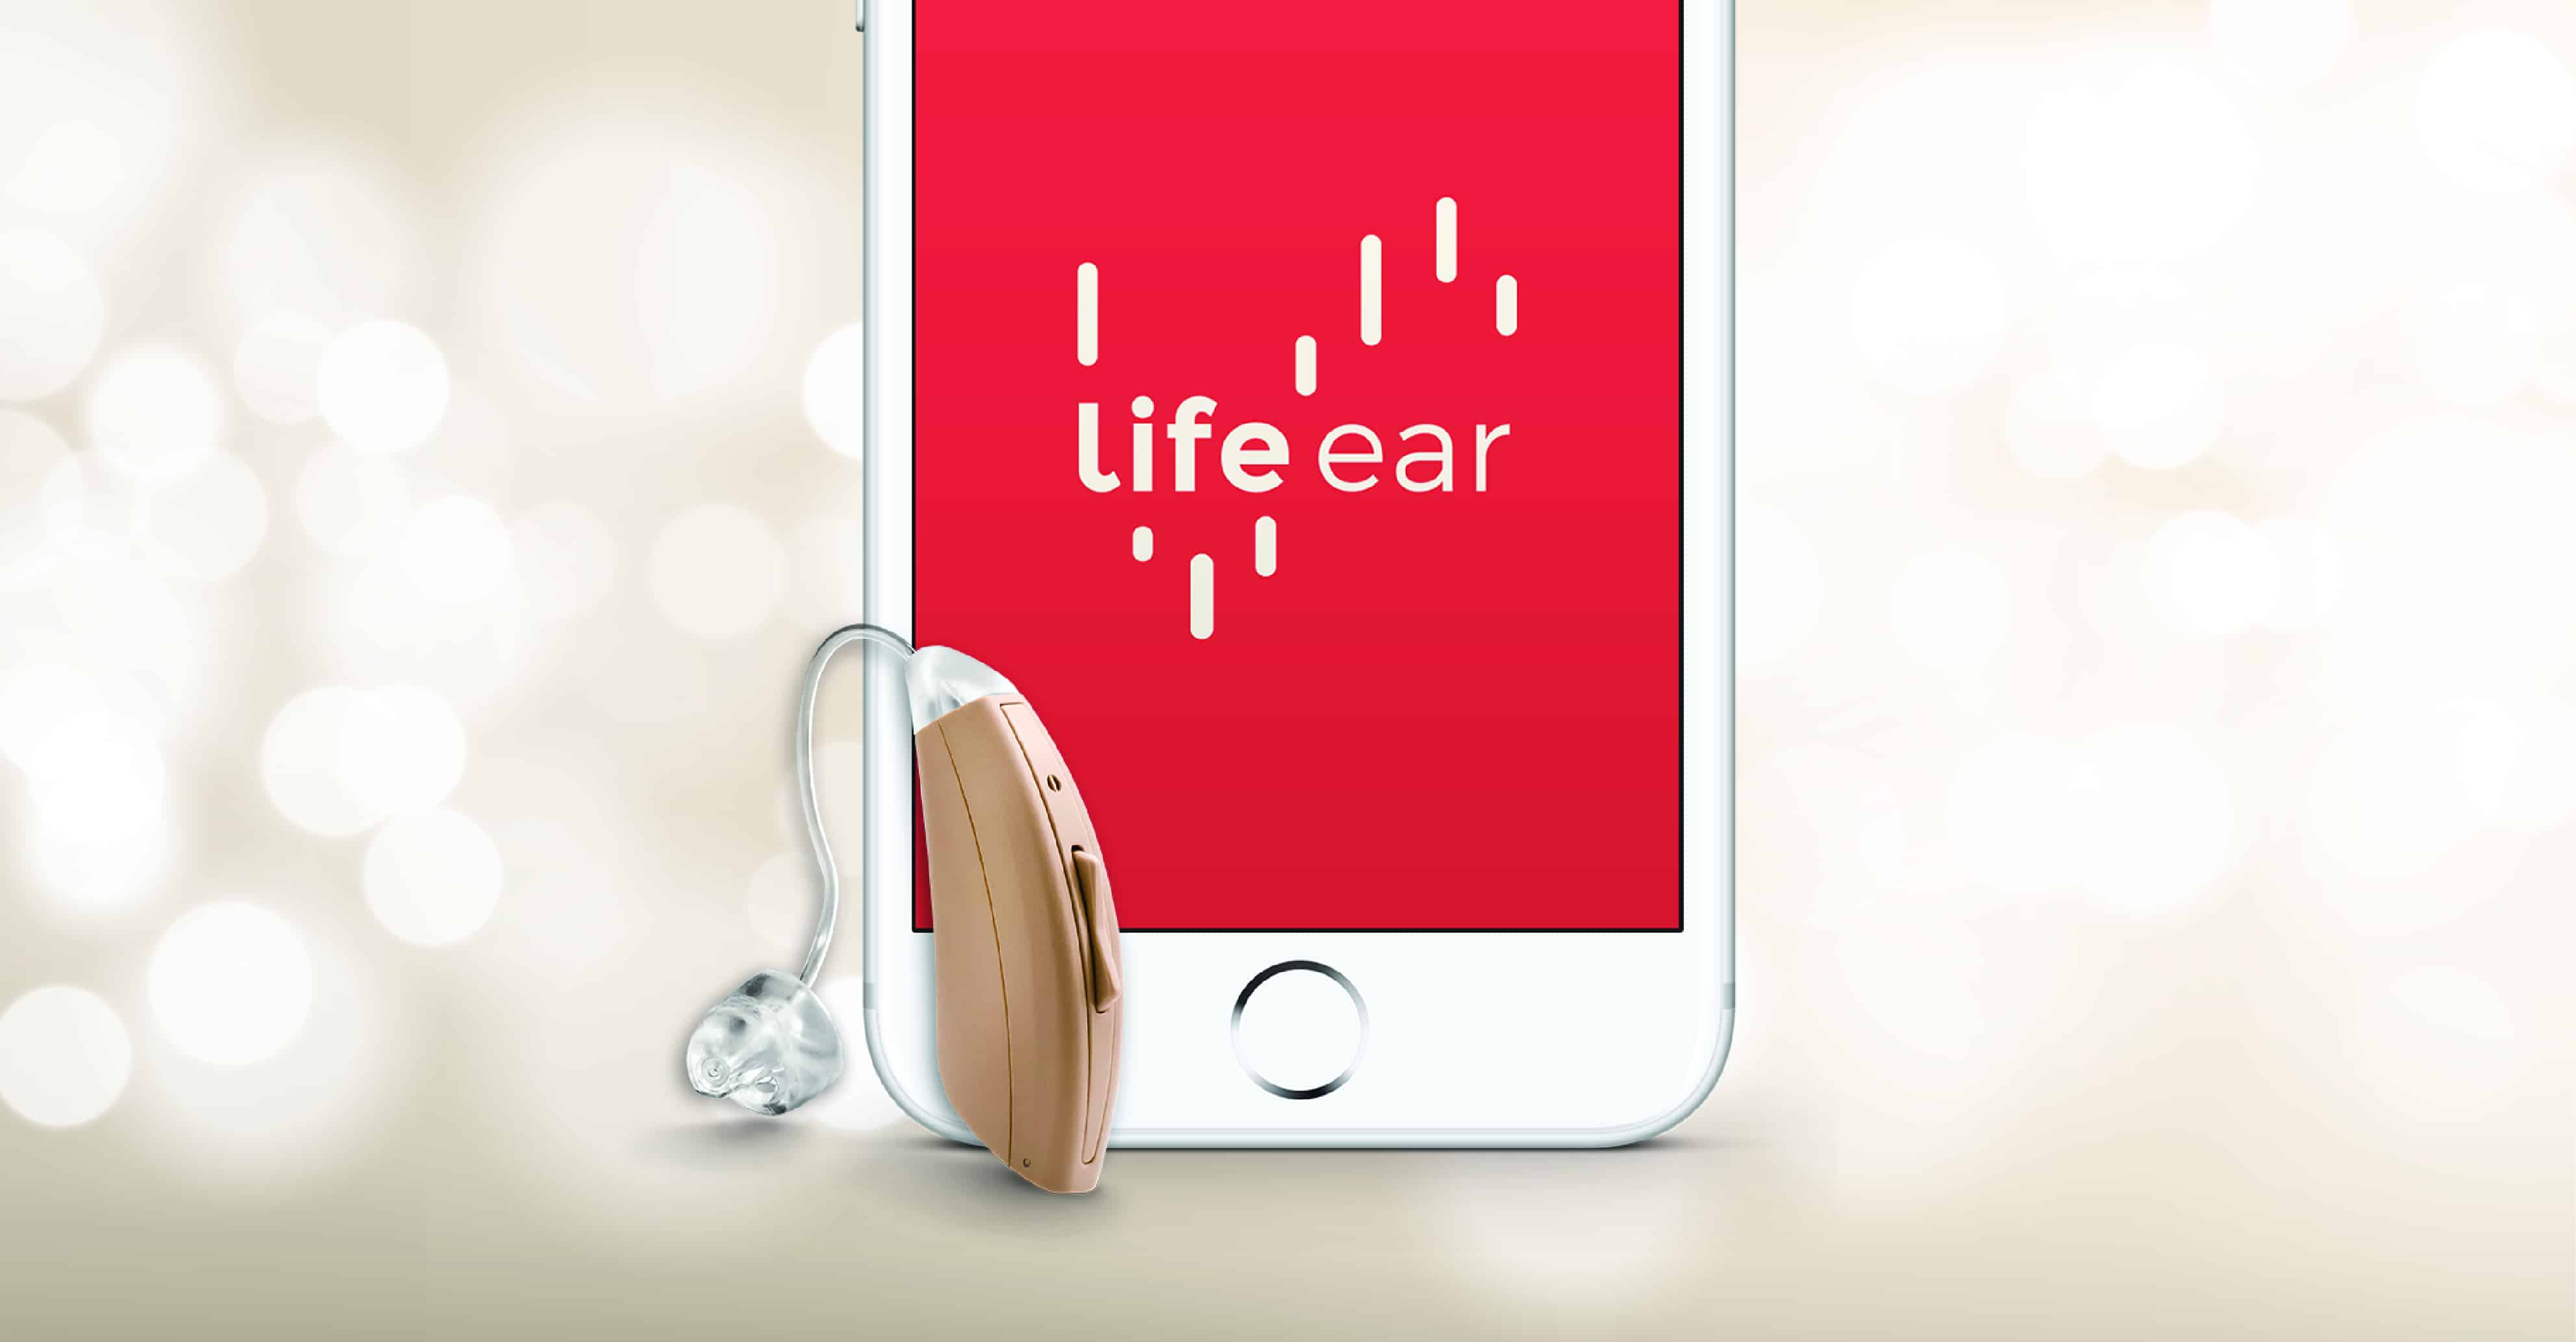 LifeEar to Bring Holiday Cheer with Hearing Aid Giveaway